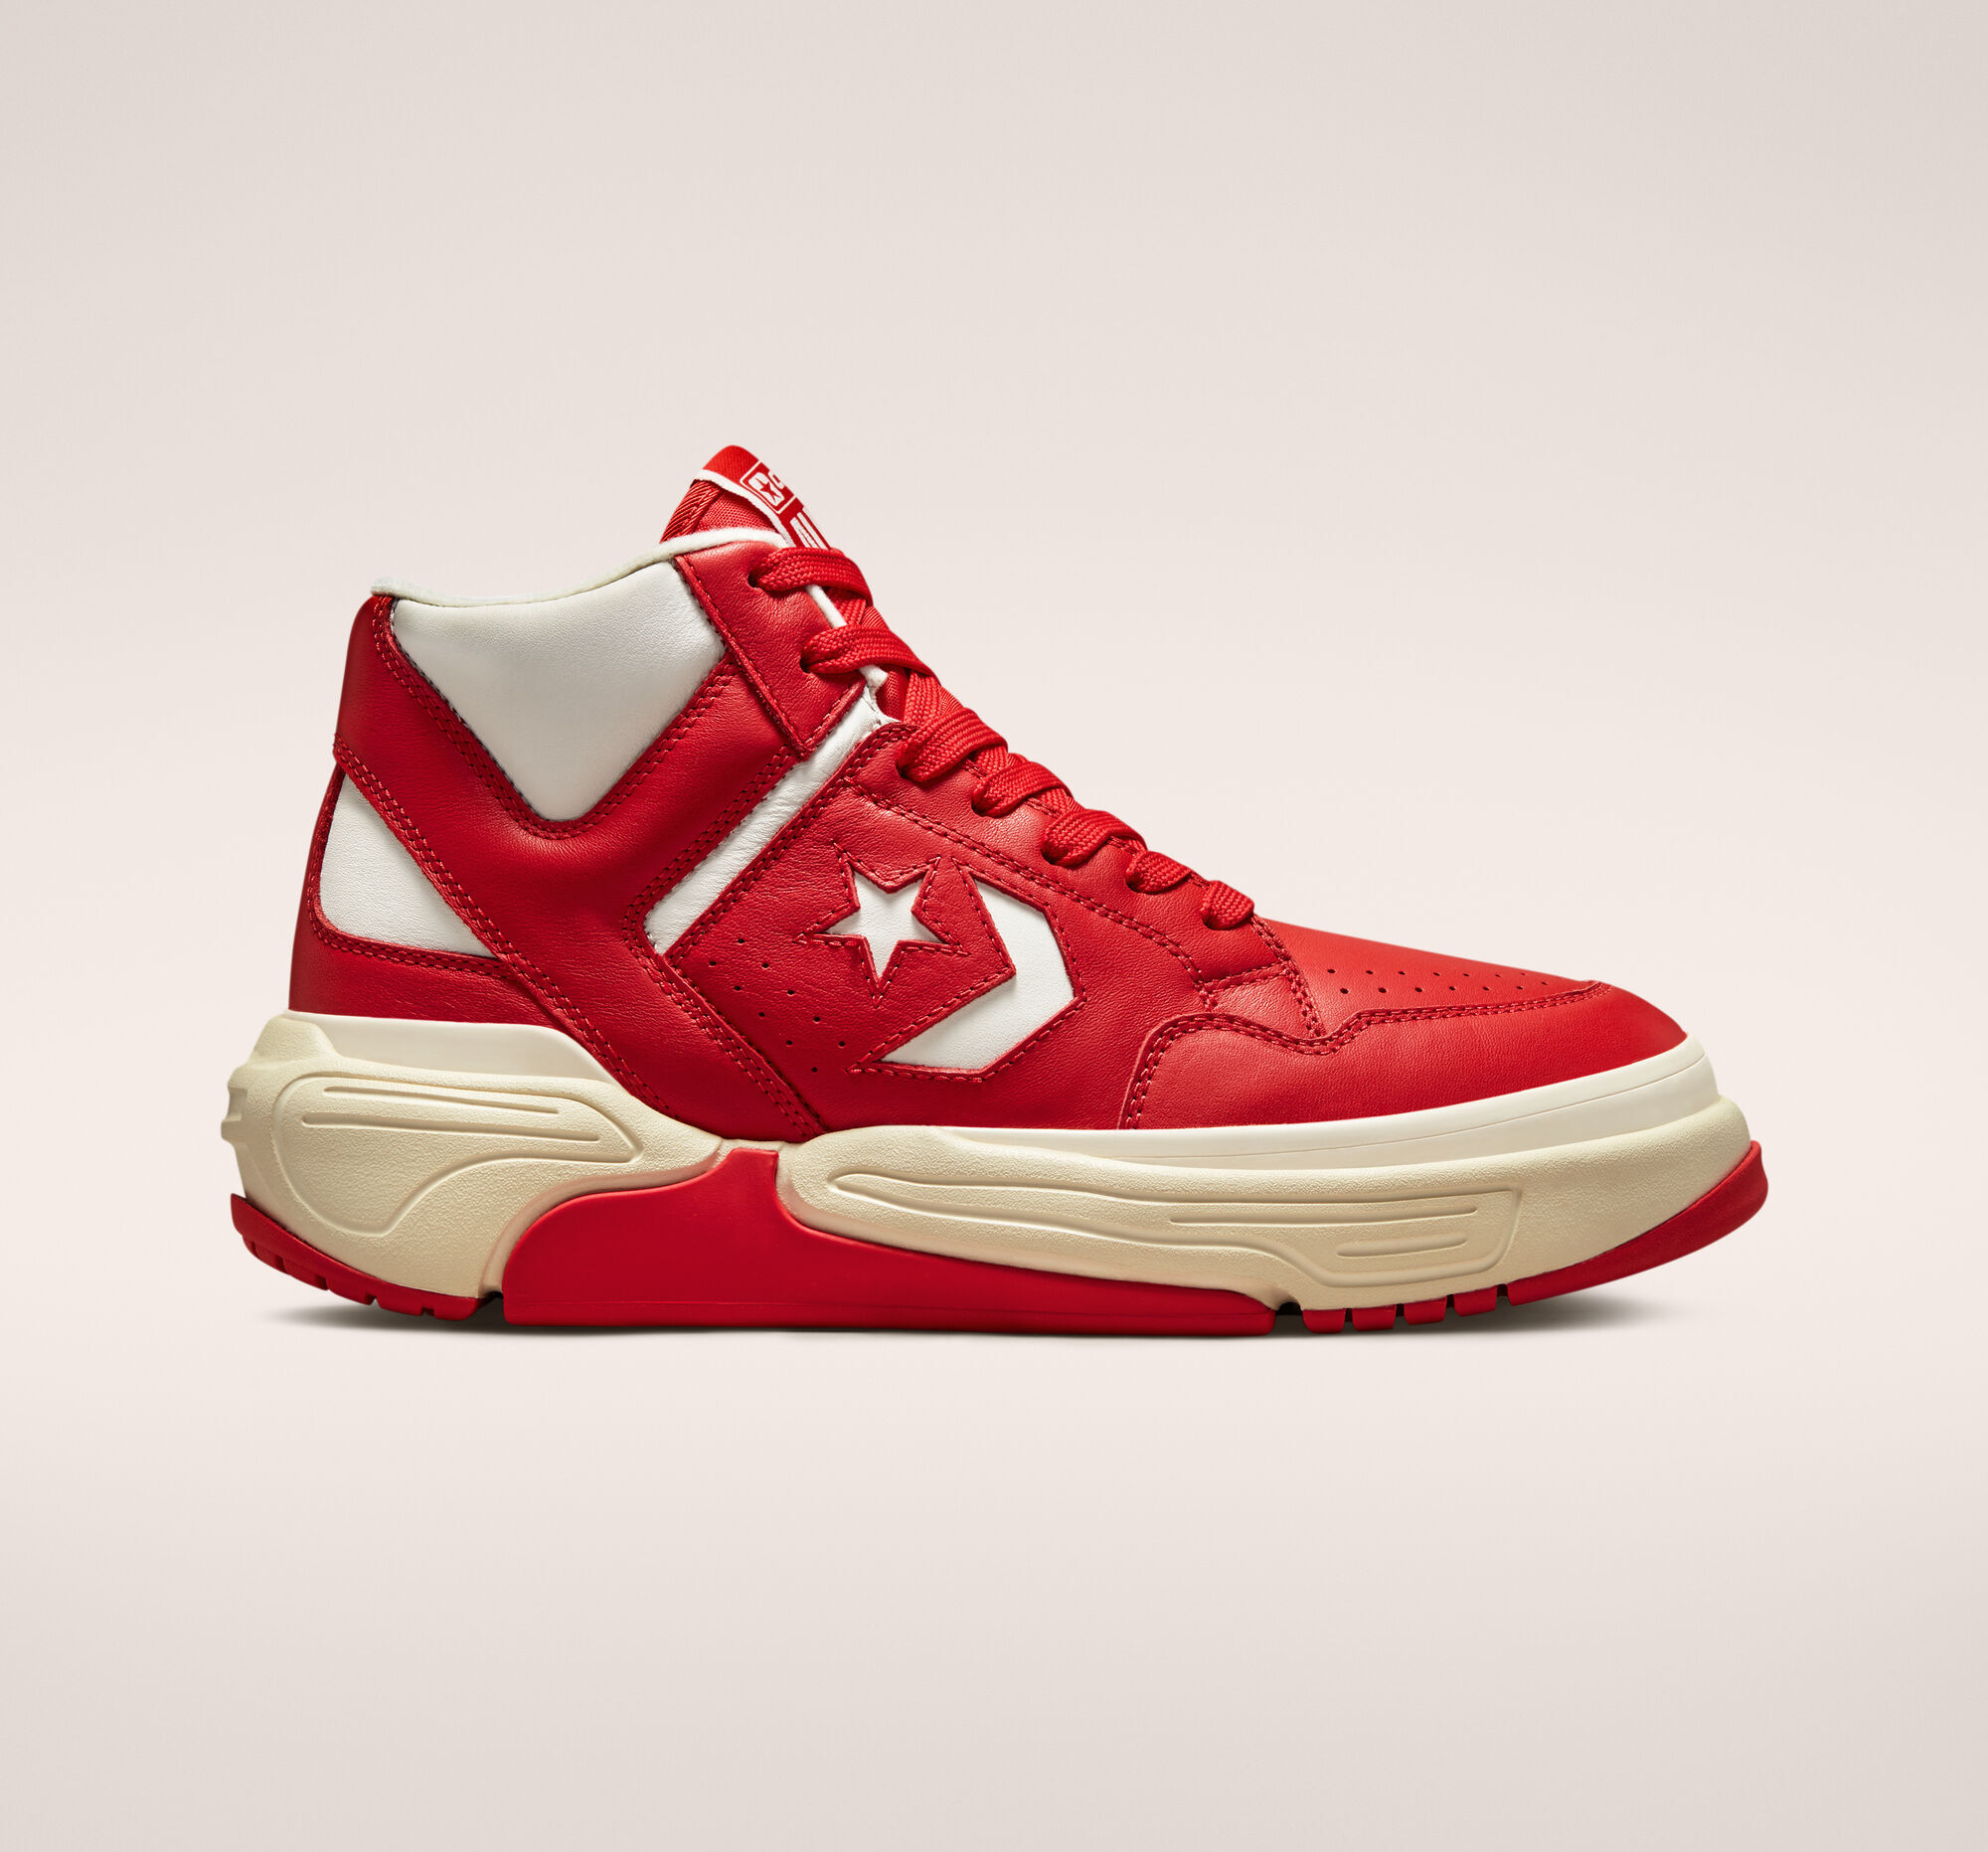 Converse Weapon CX Mid Red